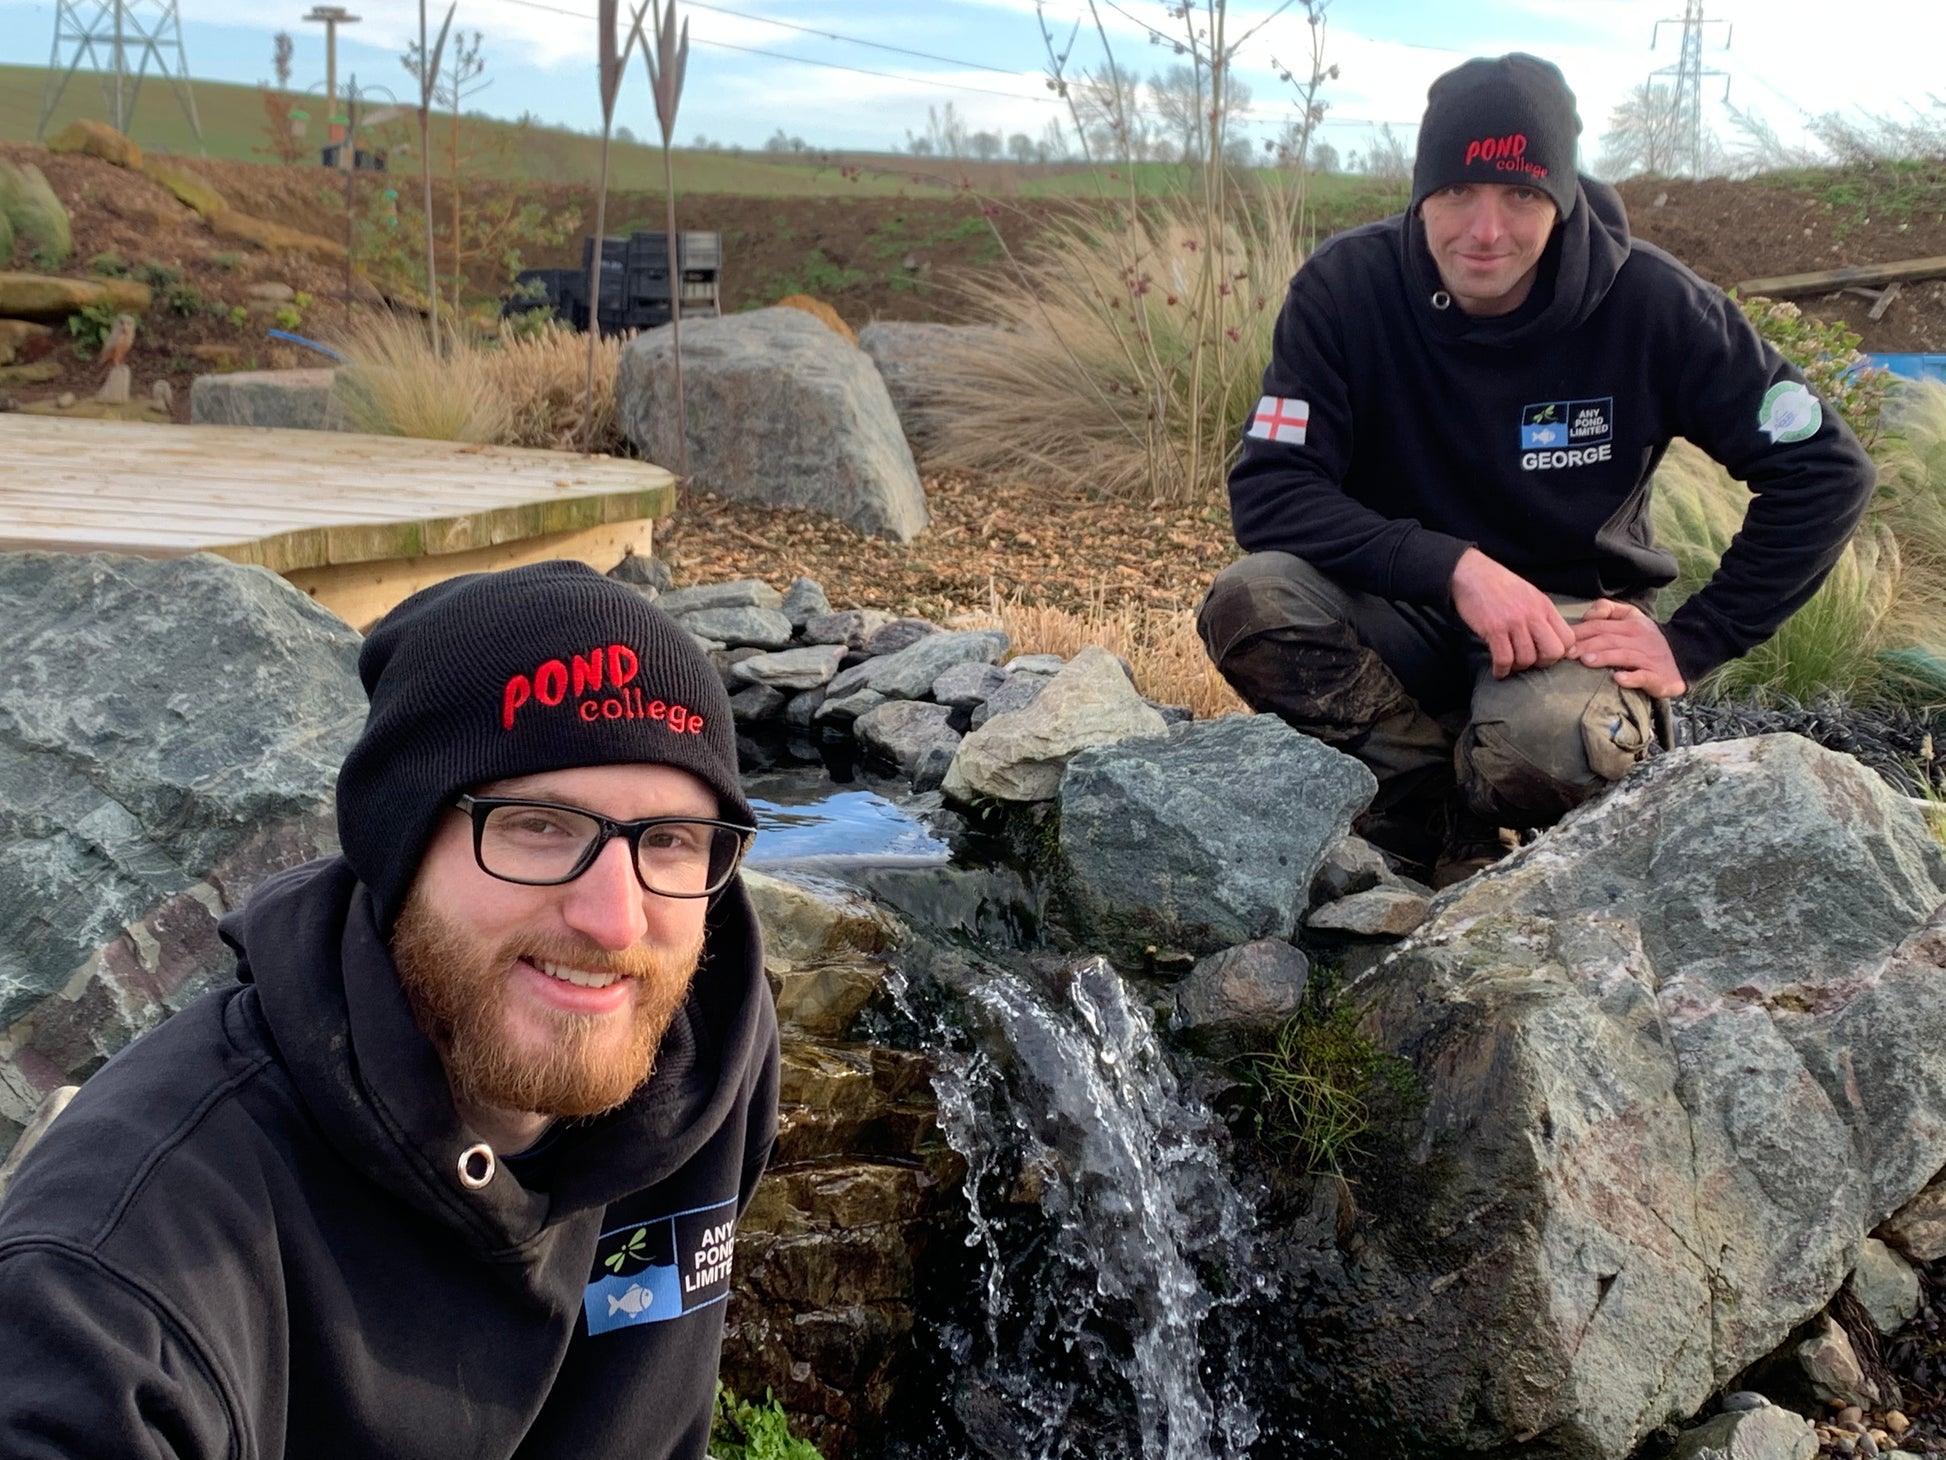 POND.college Beanies - WaterFeature.Shop